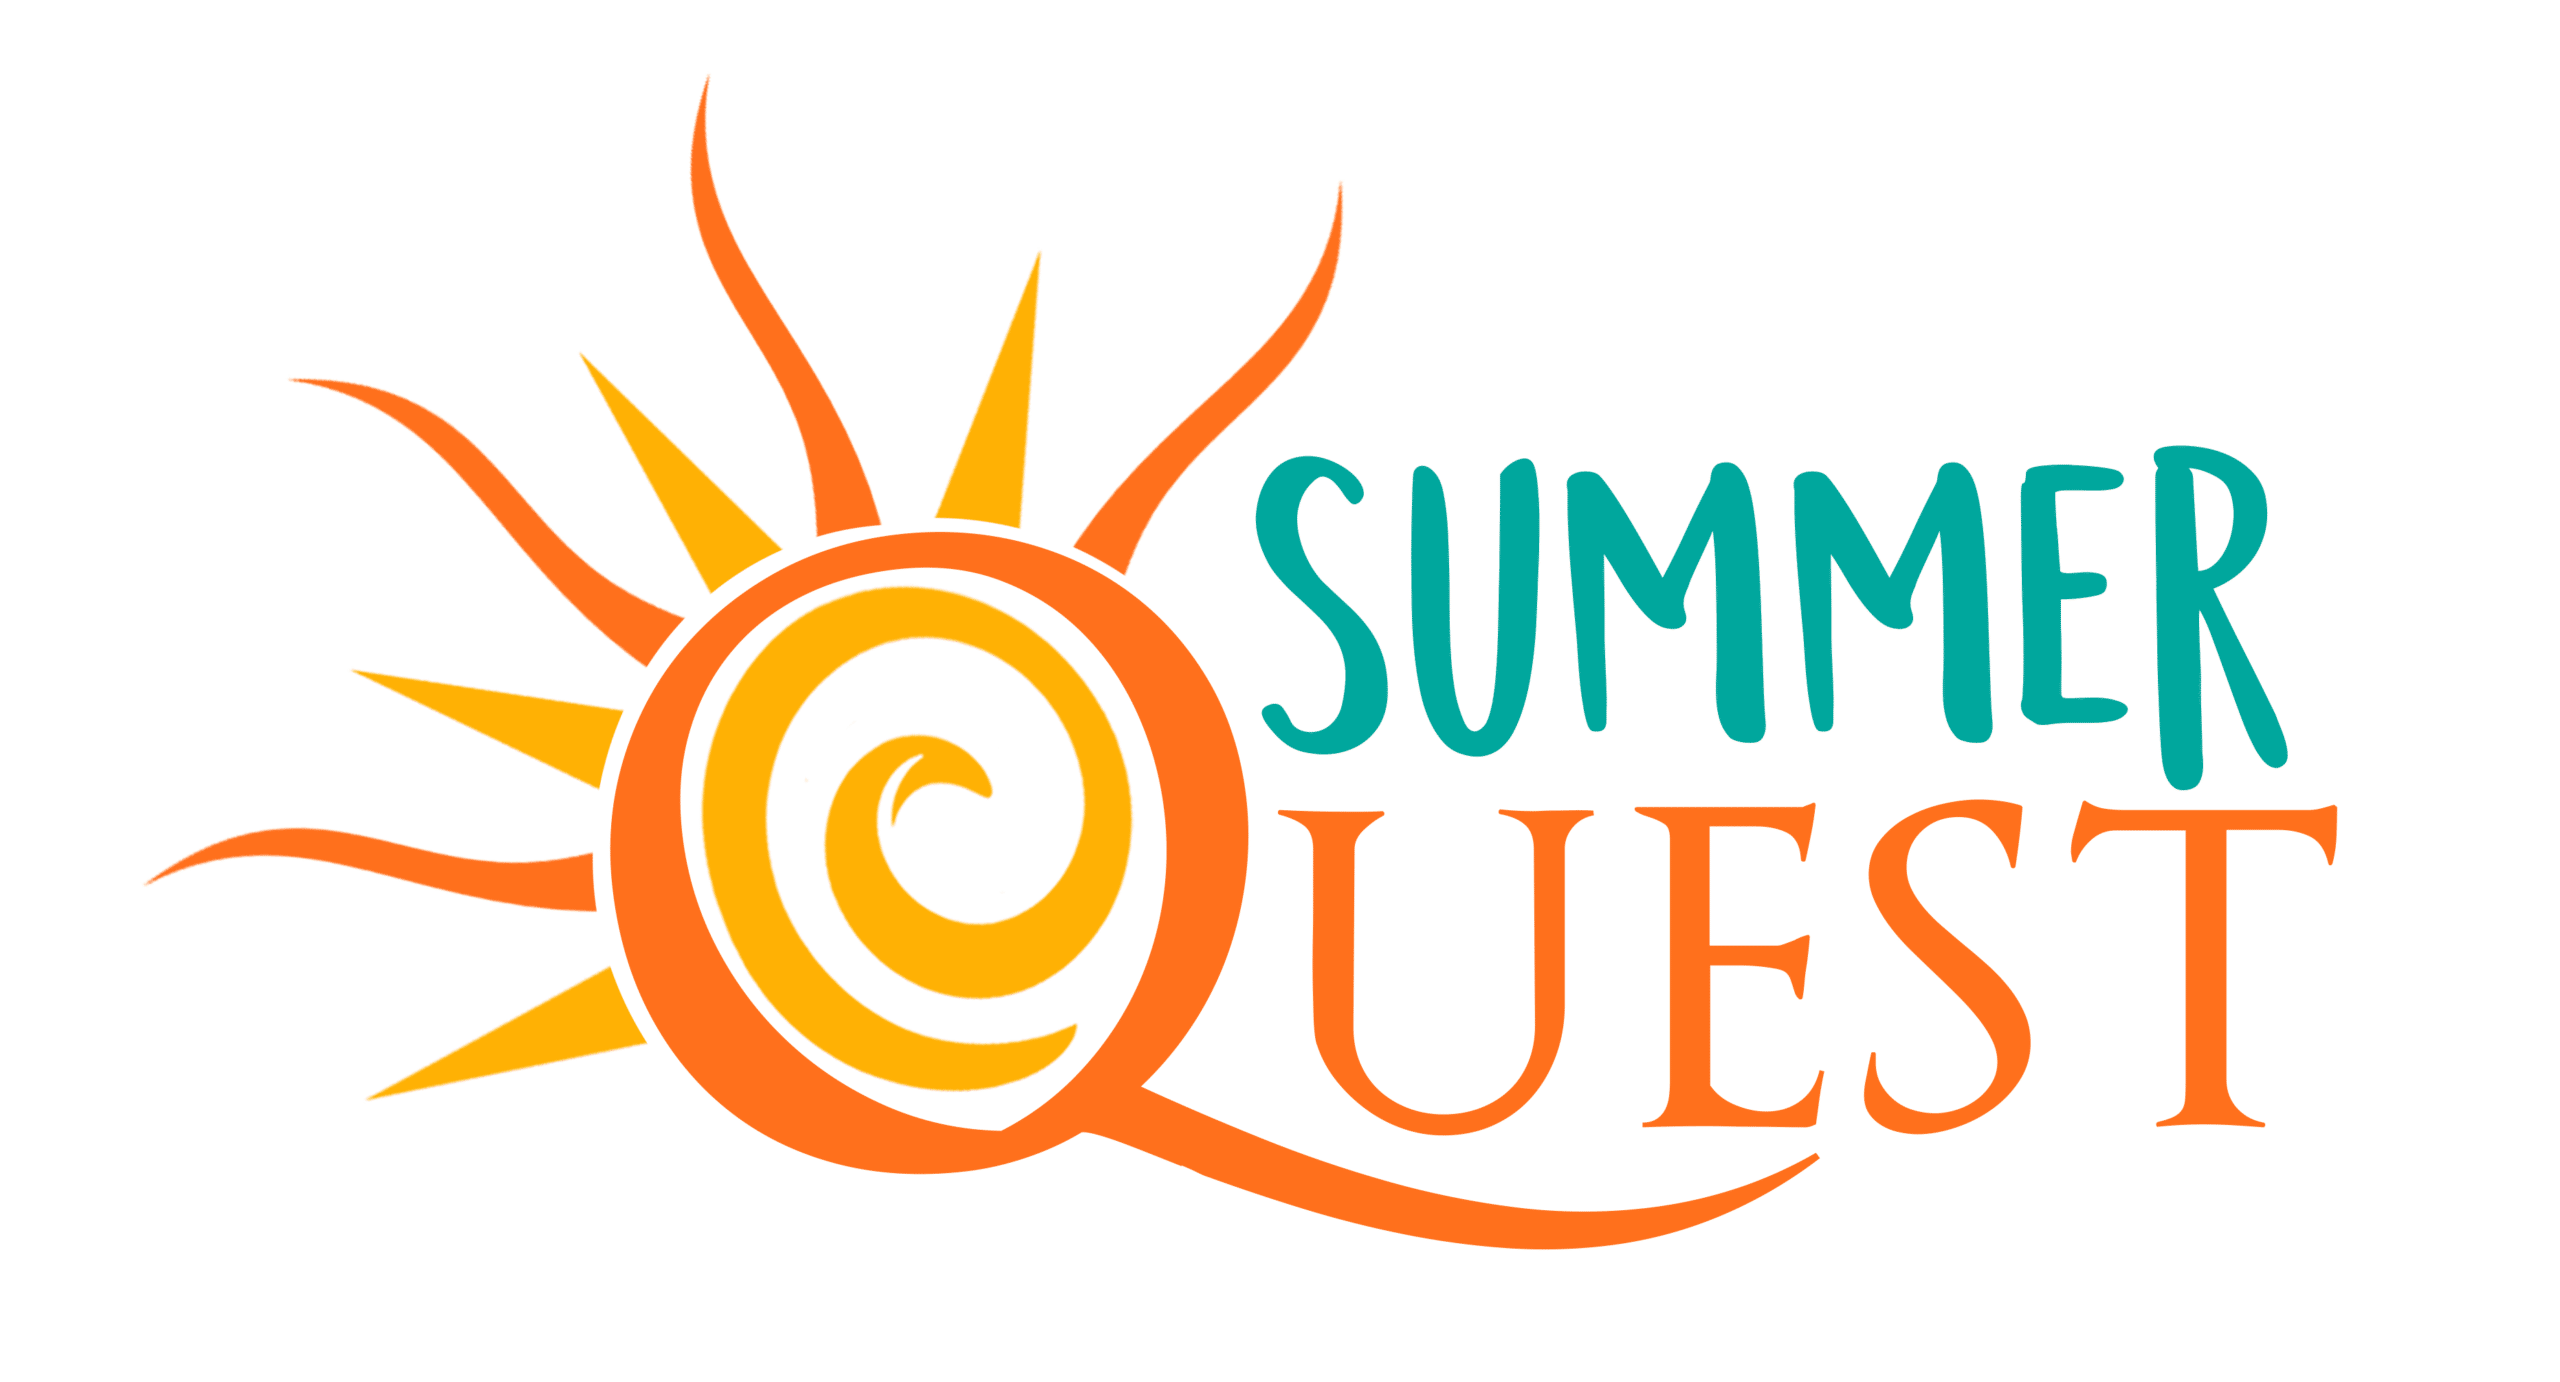 SummerQuest is here…